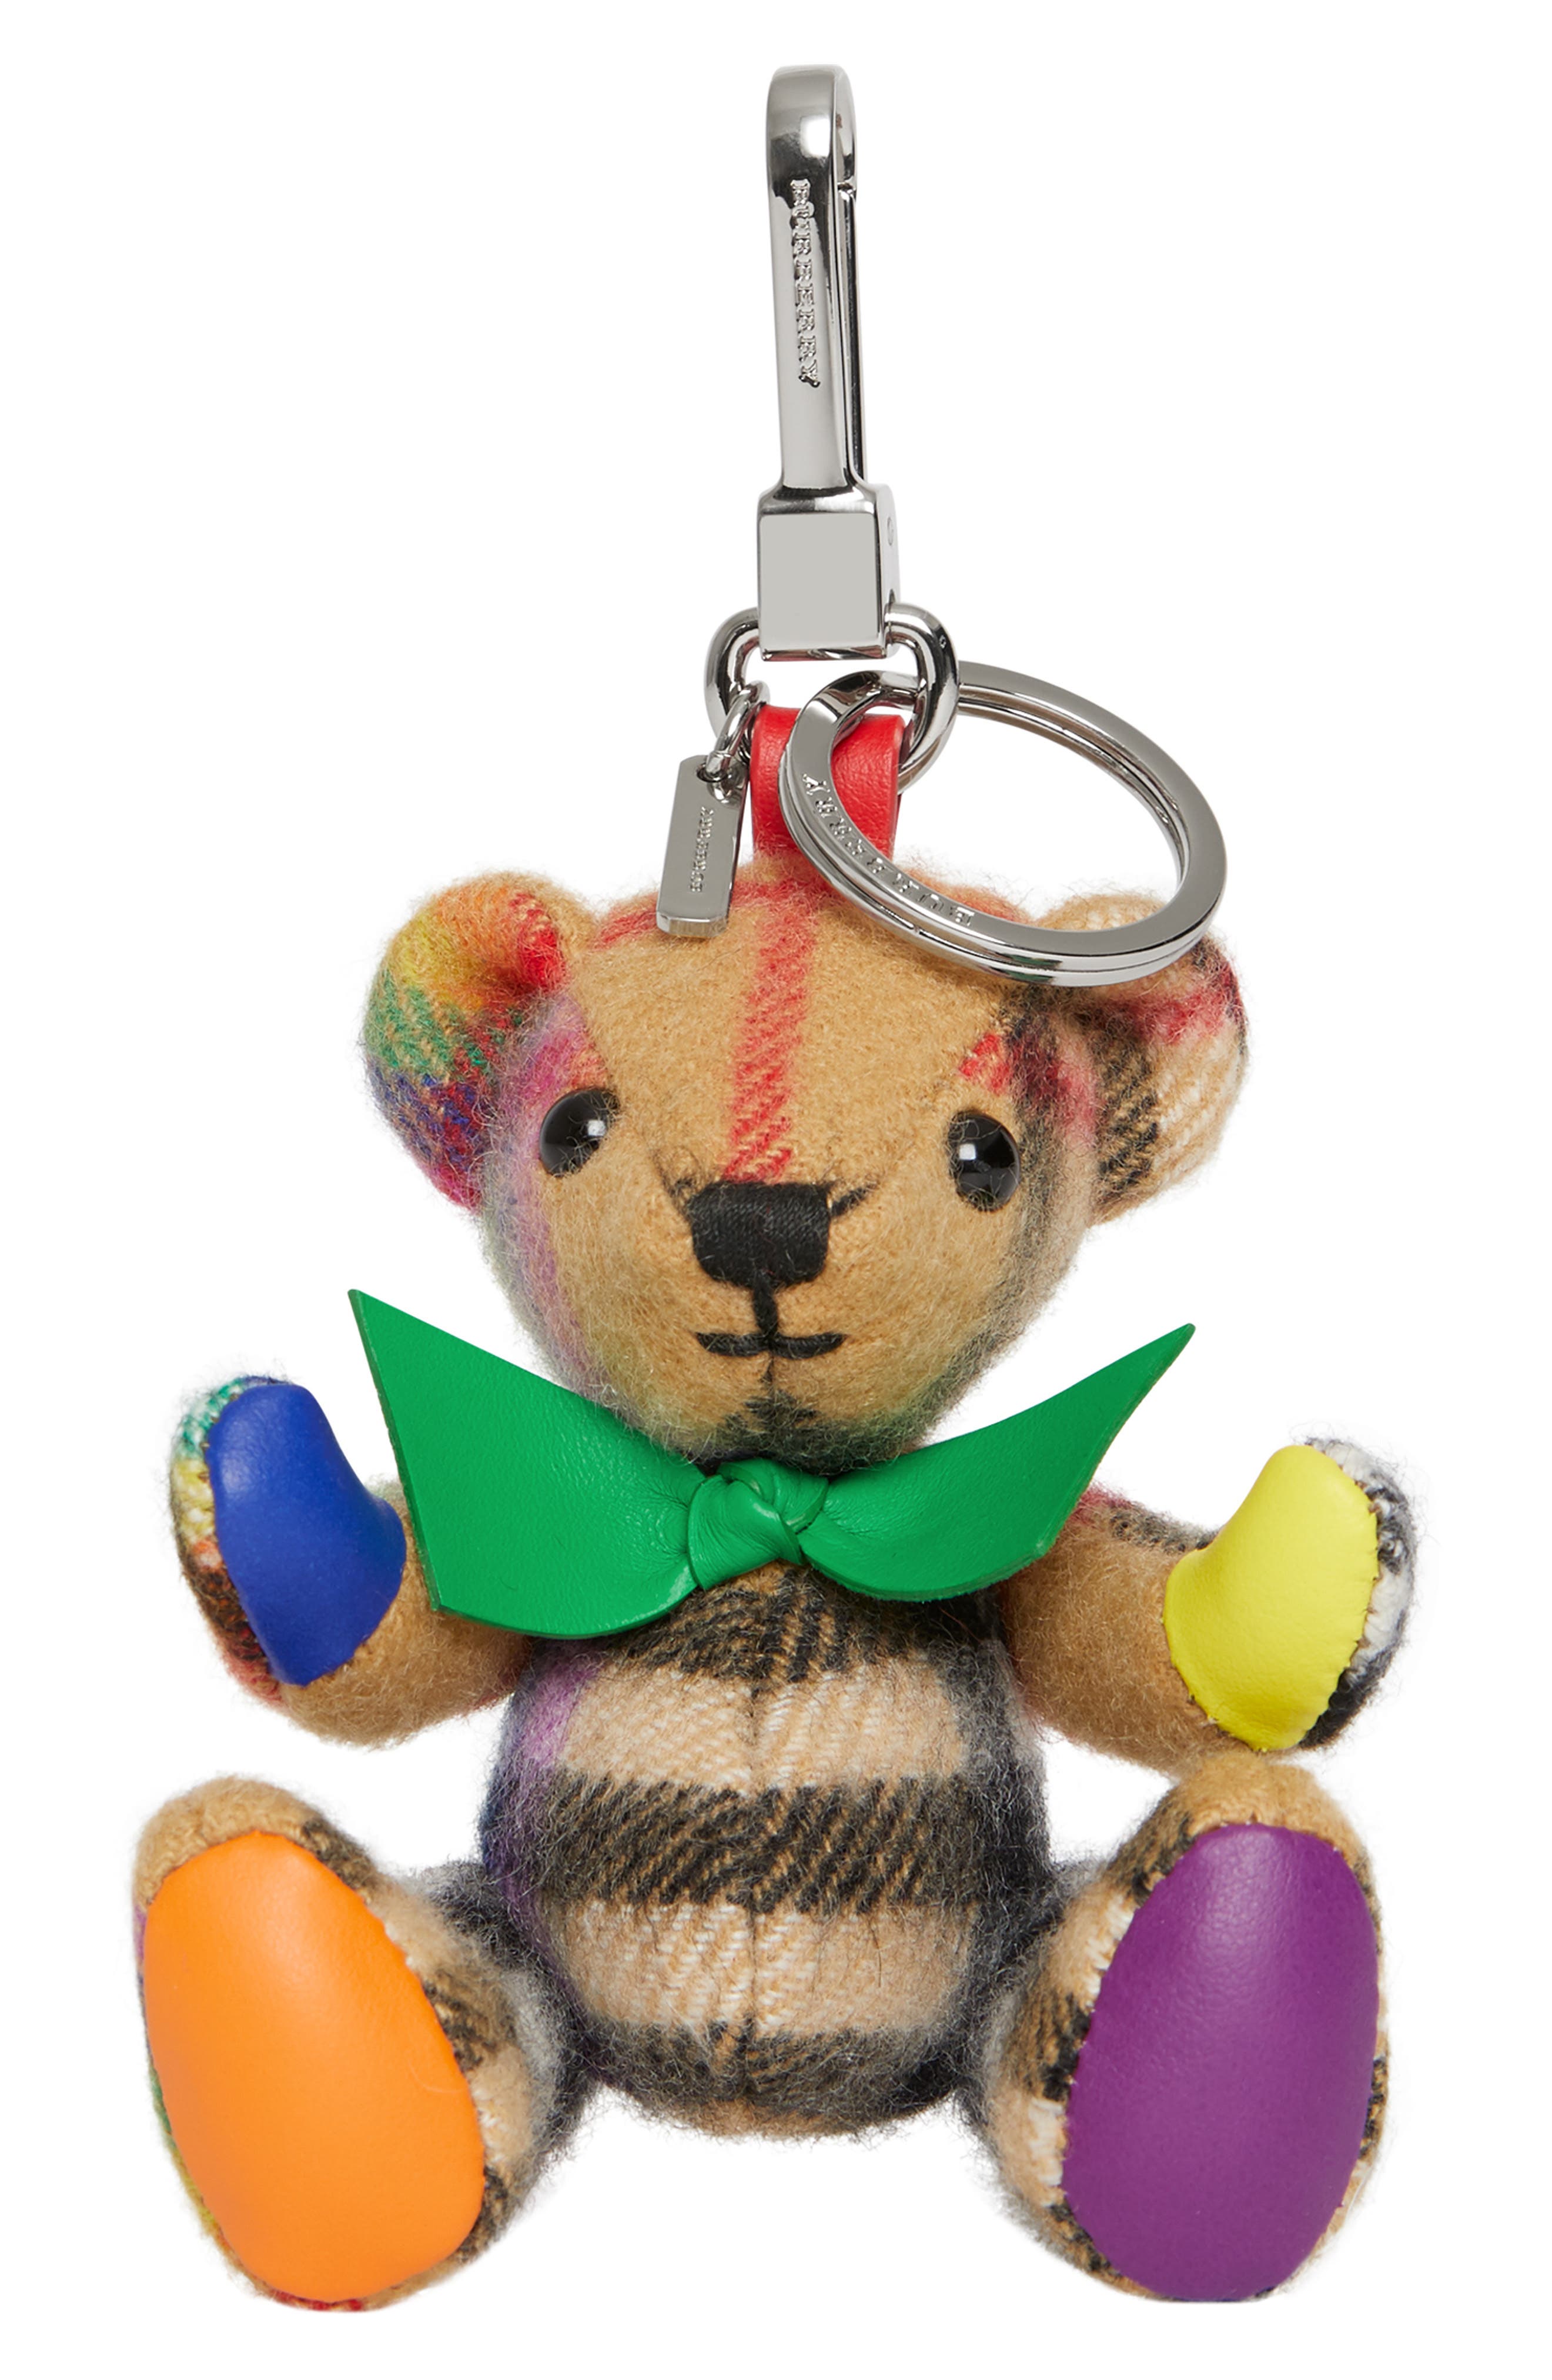 thomas bear charm in vintage check cashmere